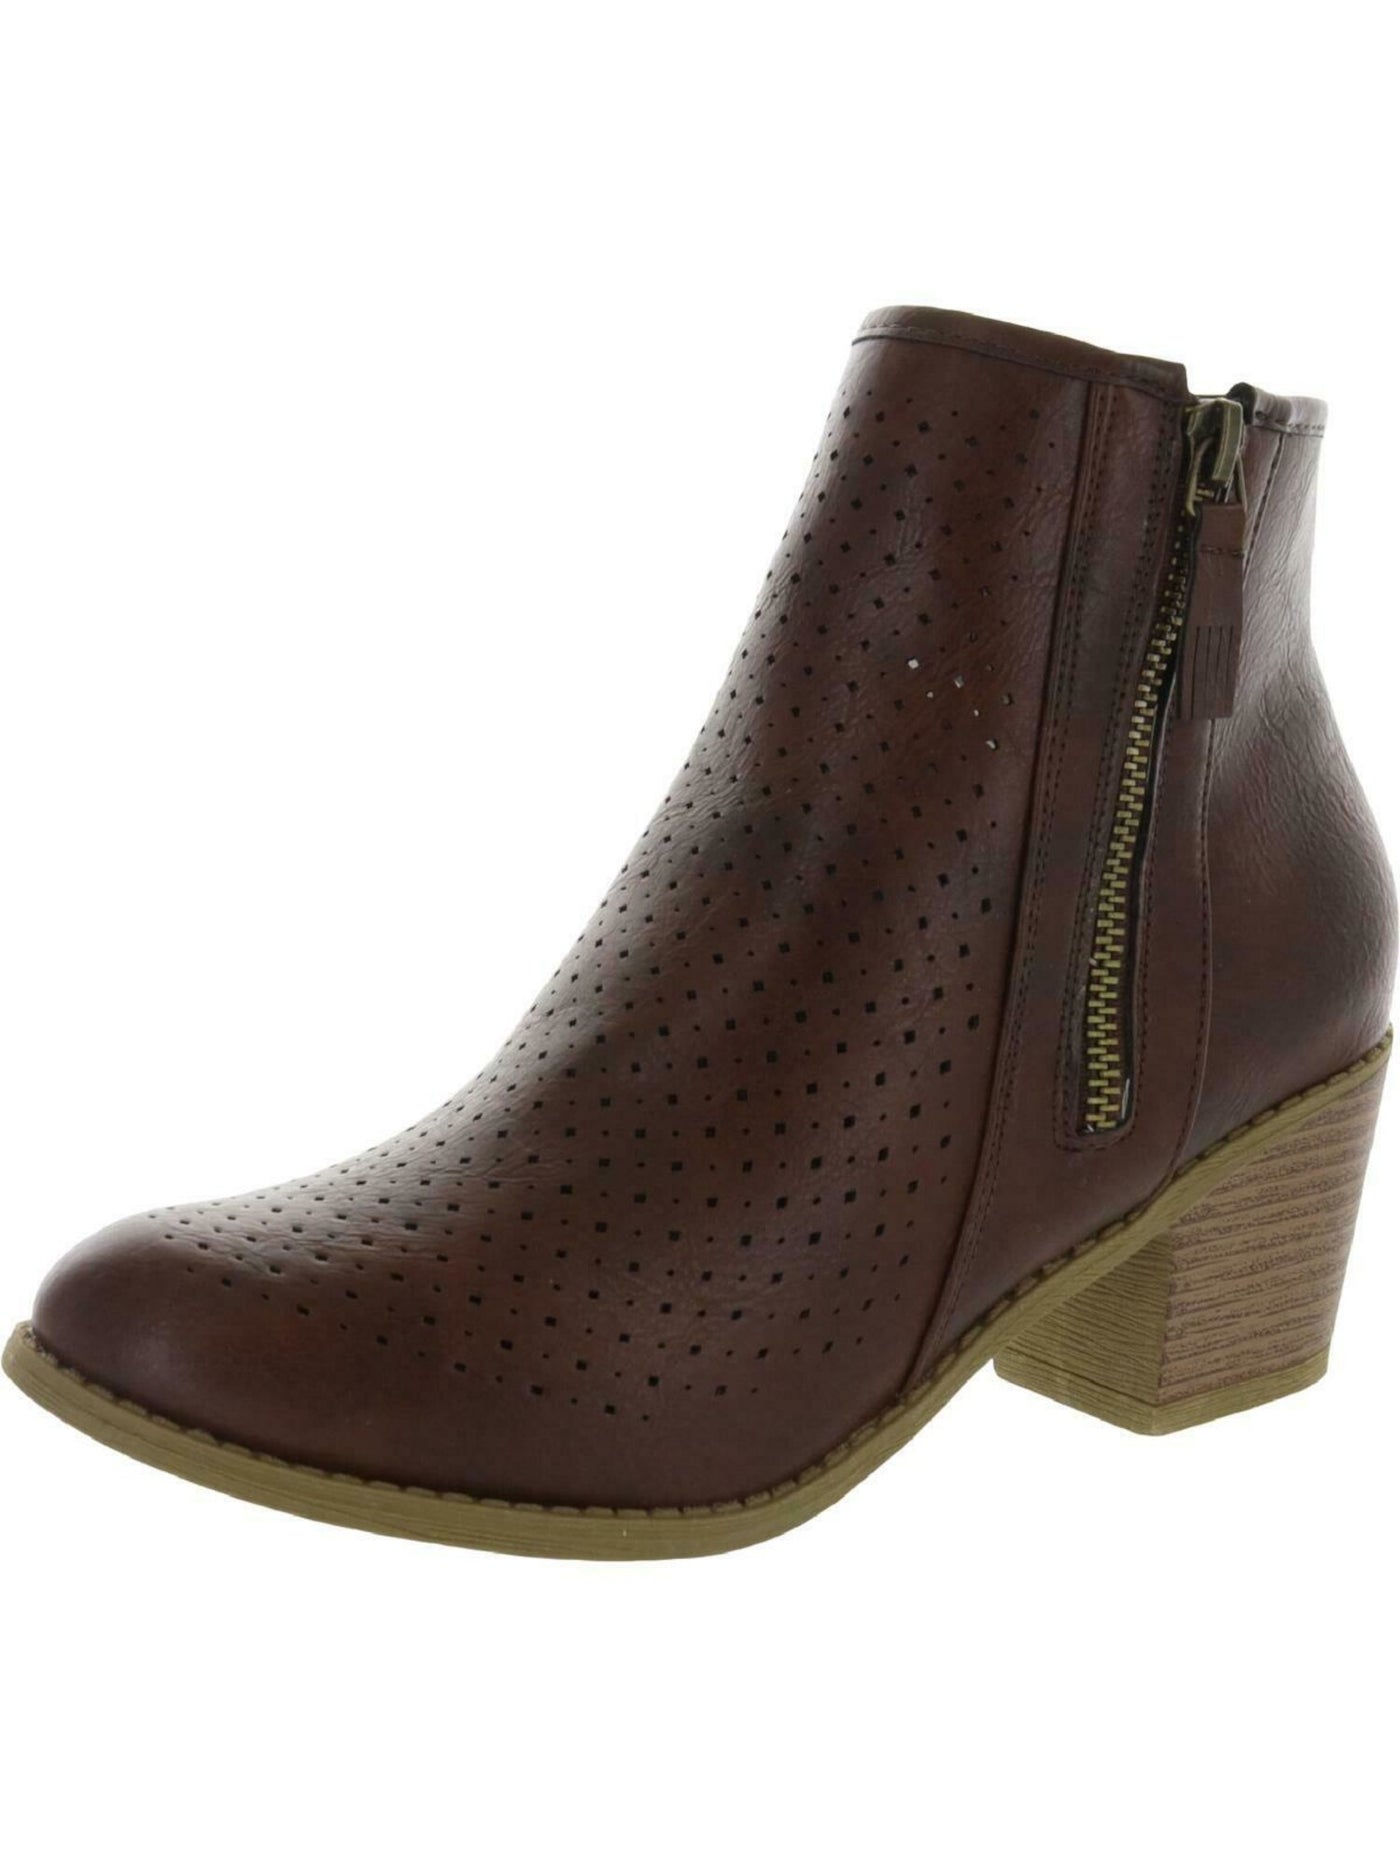 JOURNEE COLLECTION Womens Brown Perforated Padded Round Toe Block Heel Zip-Up Booties 10